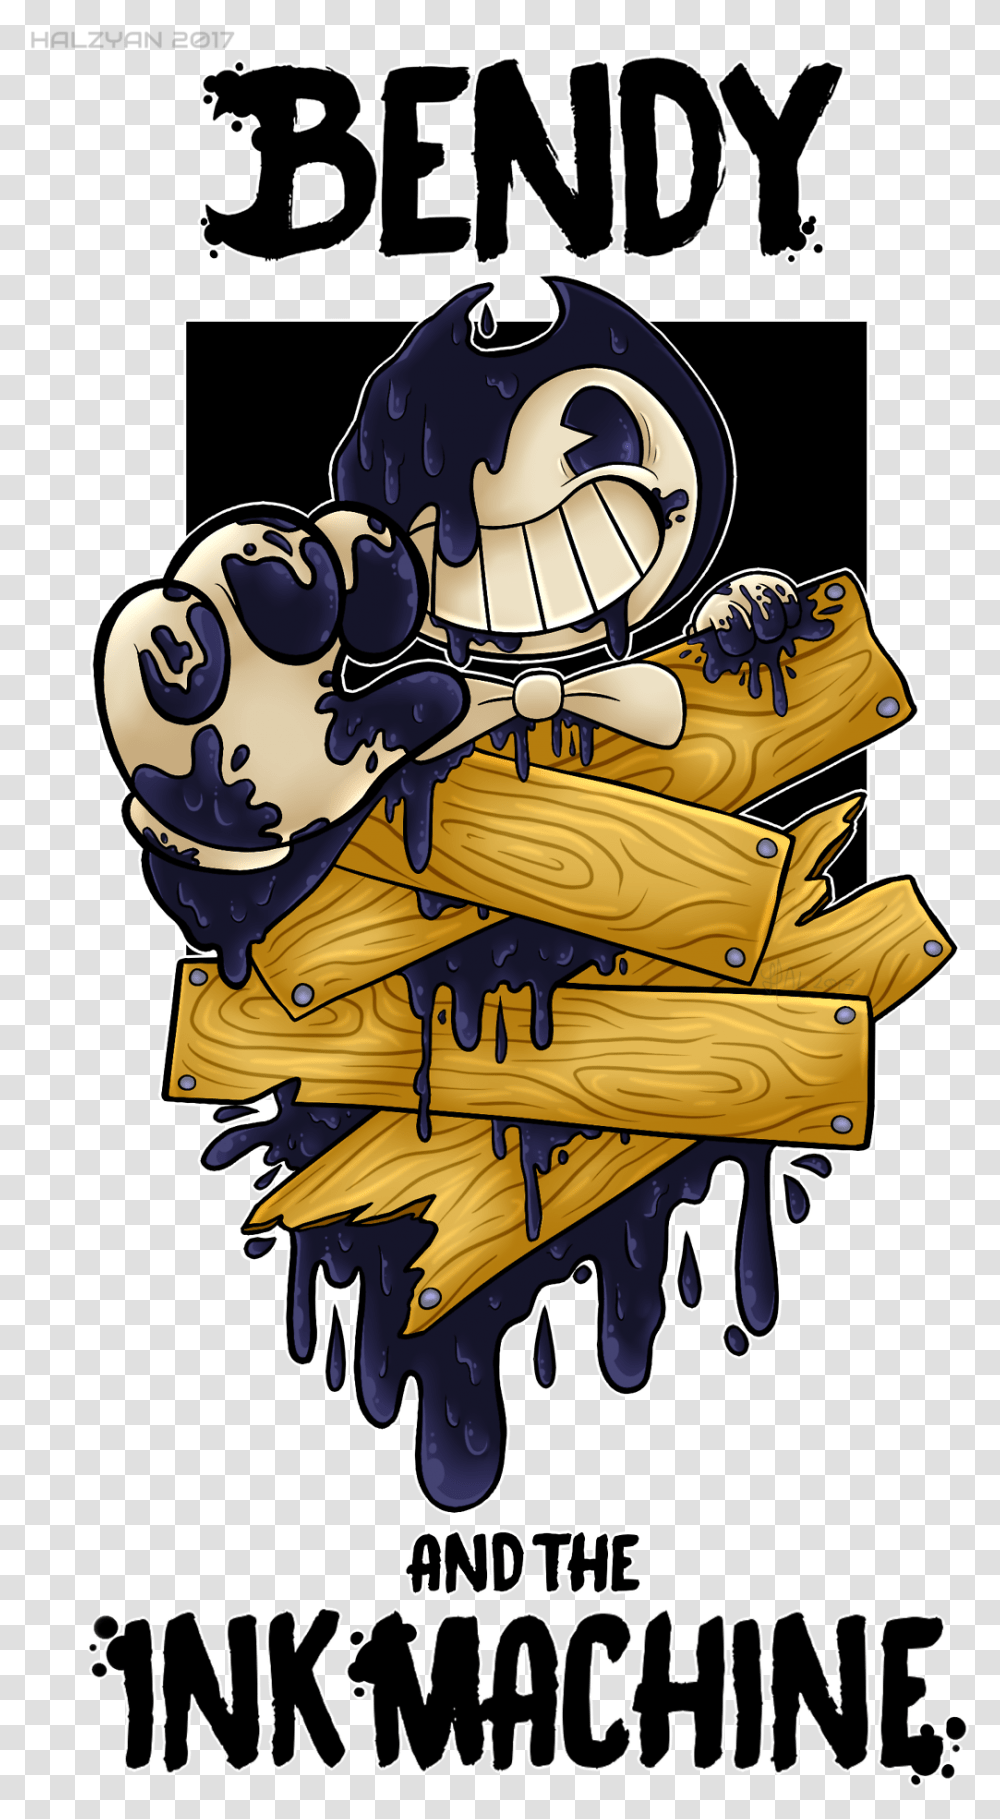 Bendy And The Ink Machine Wallpaper Iphone, Hand, Poster, Wasp, Bee Transparent Png